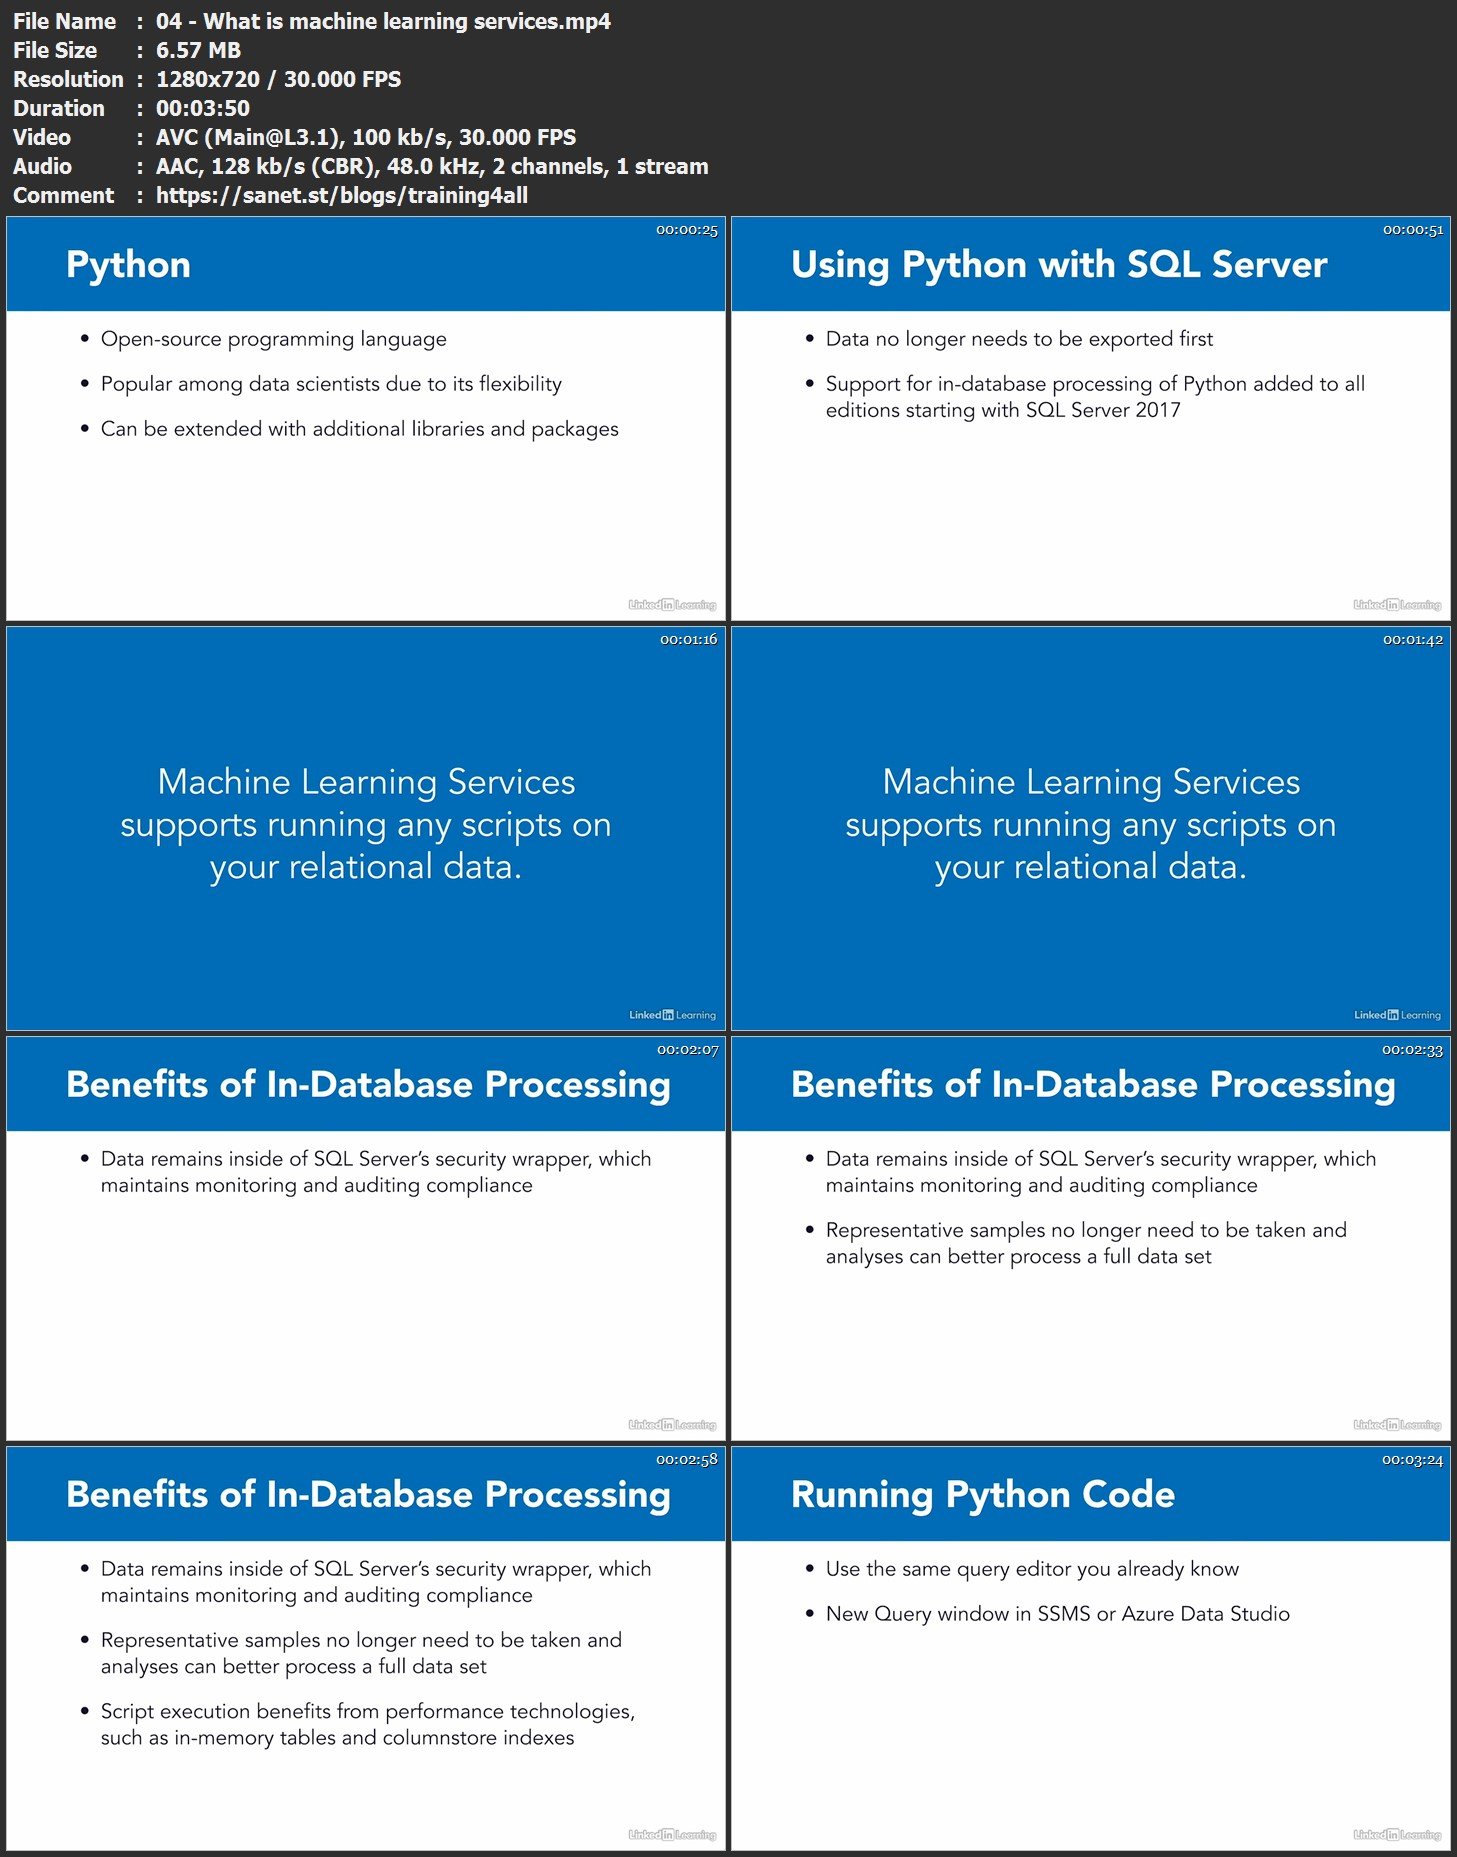 Download SQL Server Machine Learning Services: Python - SoftArchive